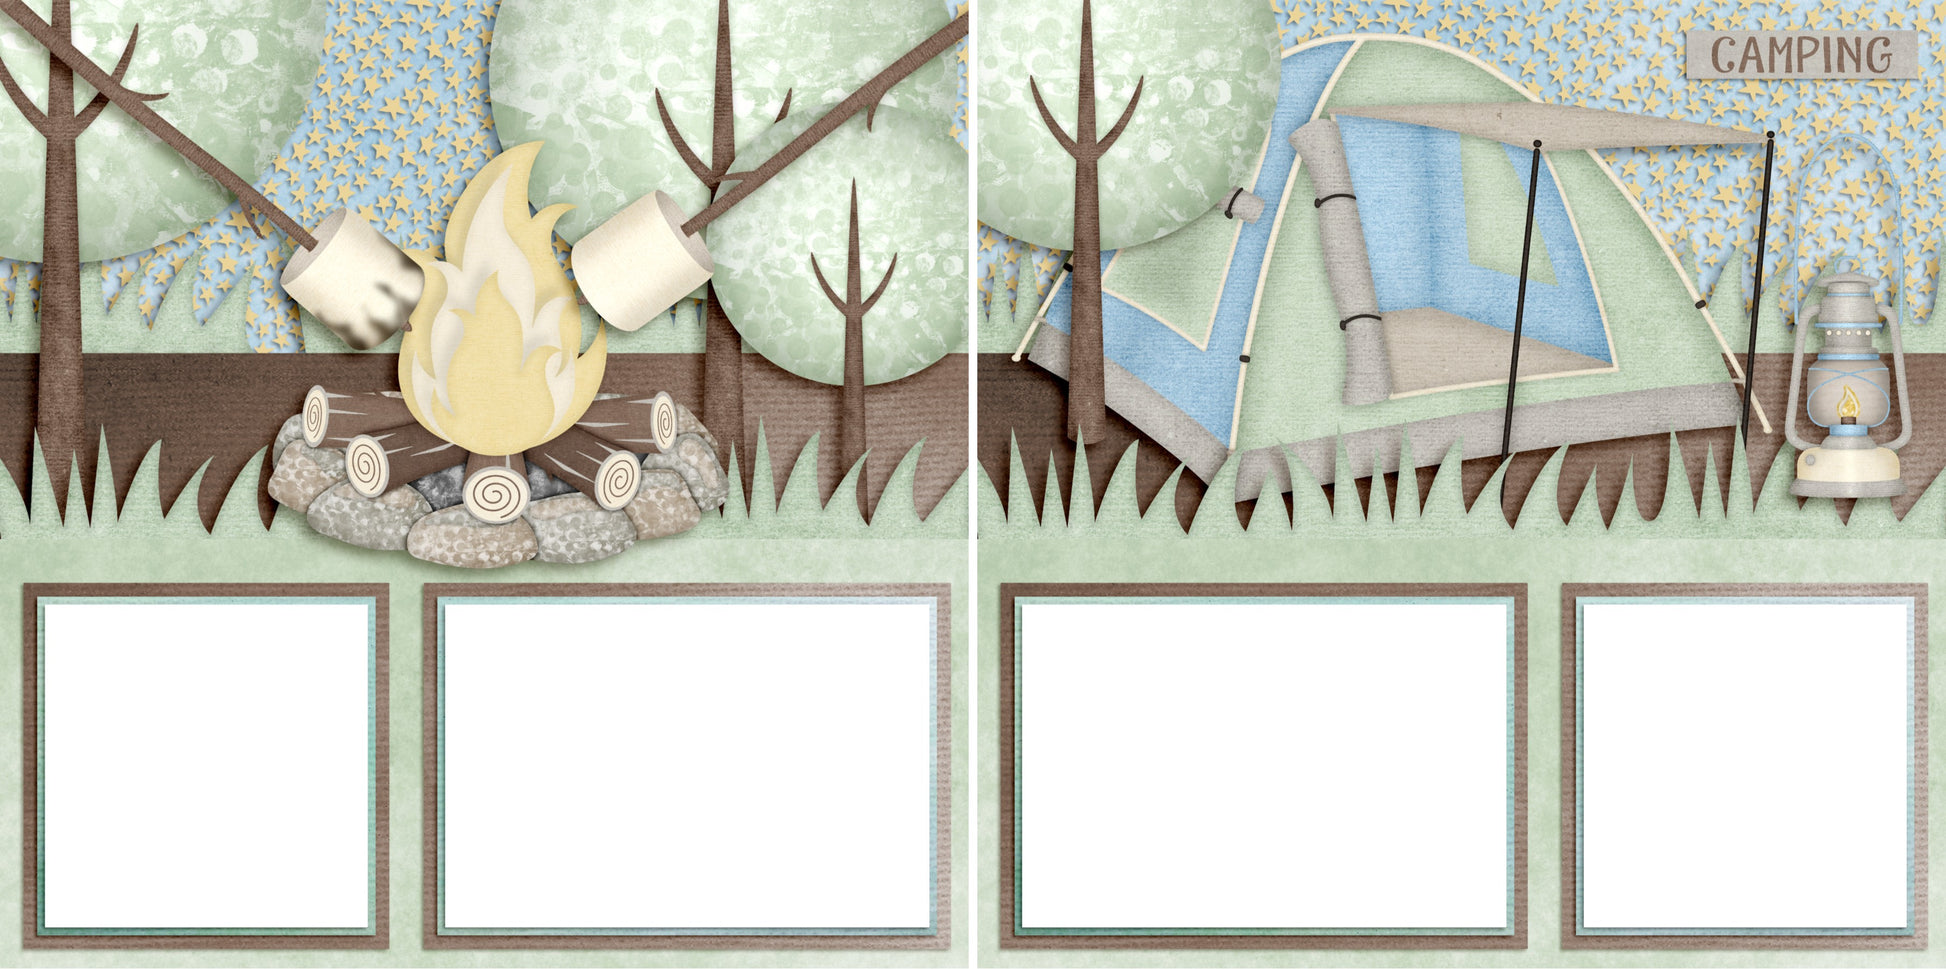 Camping - Digital Scrapbook Pages - INSTANT DOWNLOAD - 2019 - EZscrapbooks Scrapbook Layouts Camping - Hiking, scouting